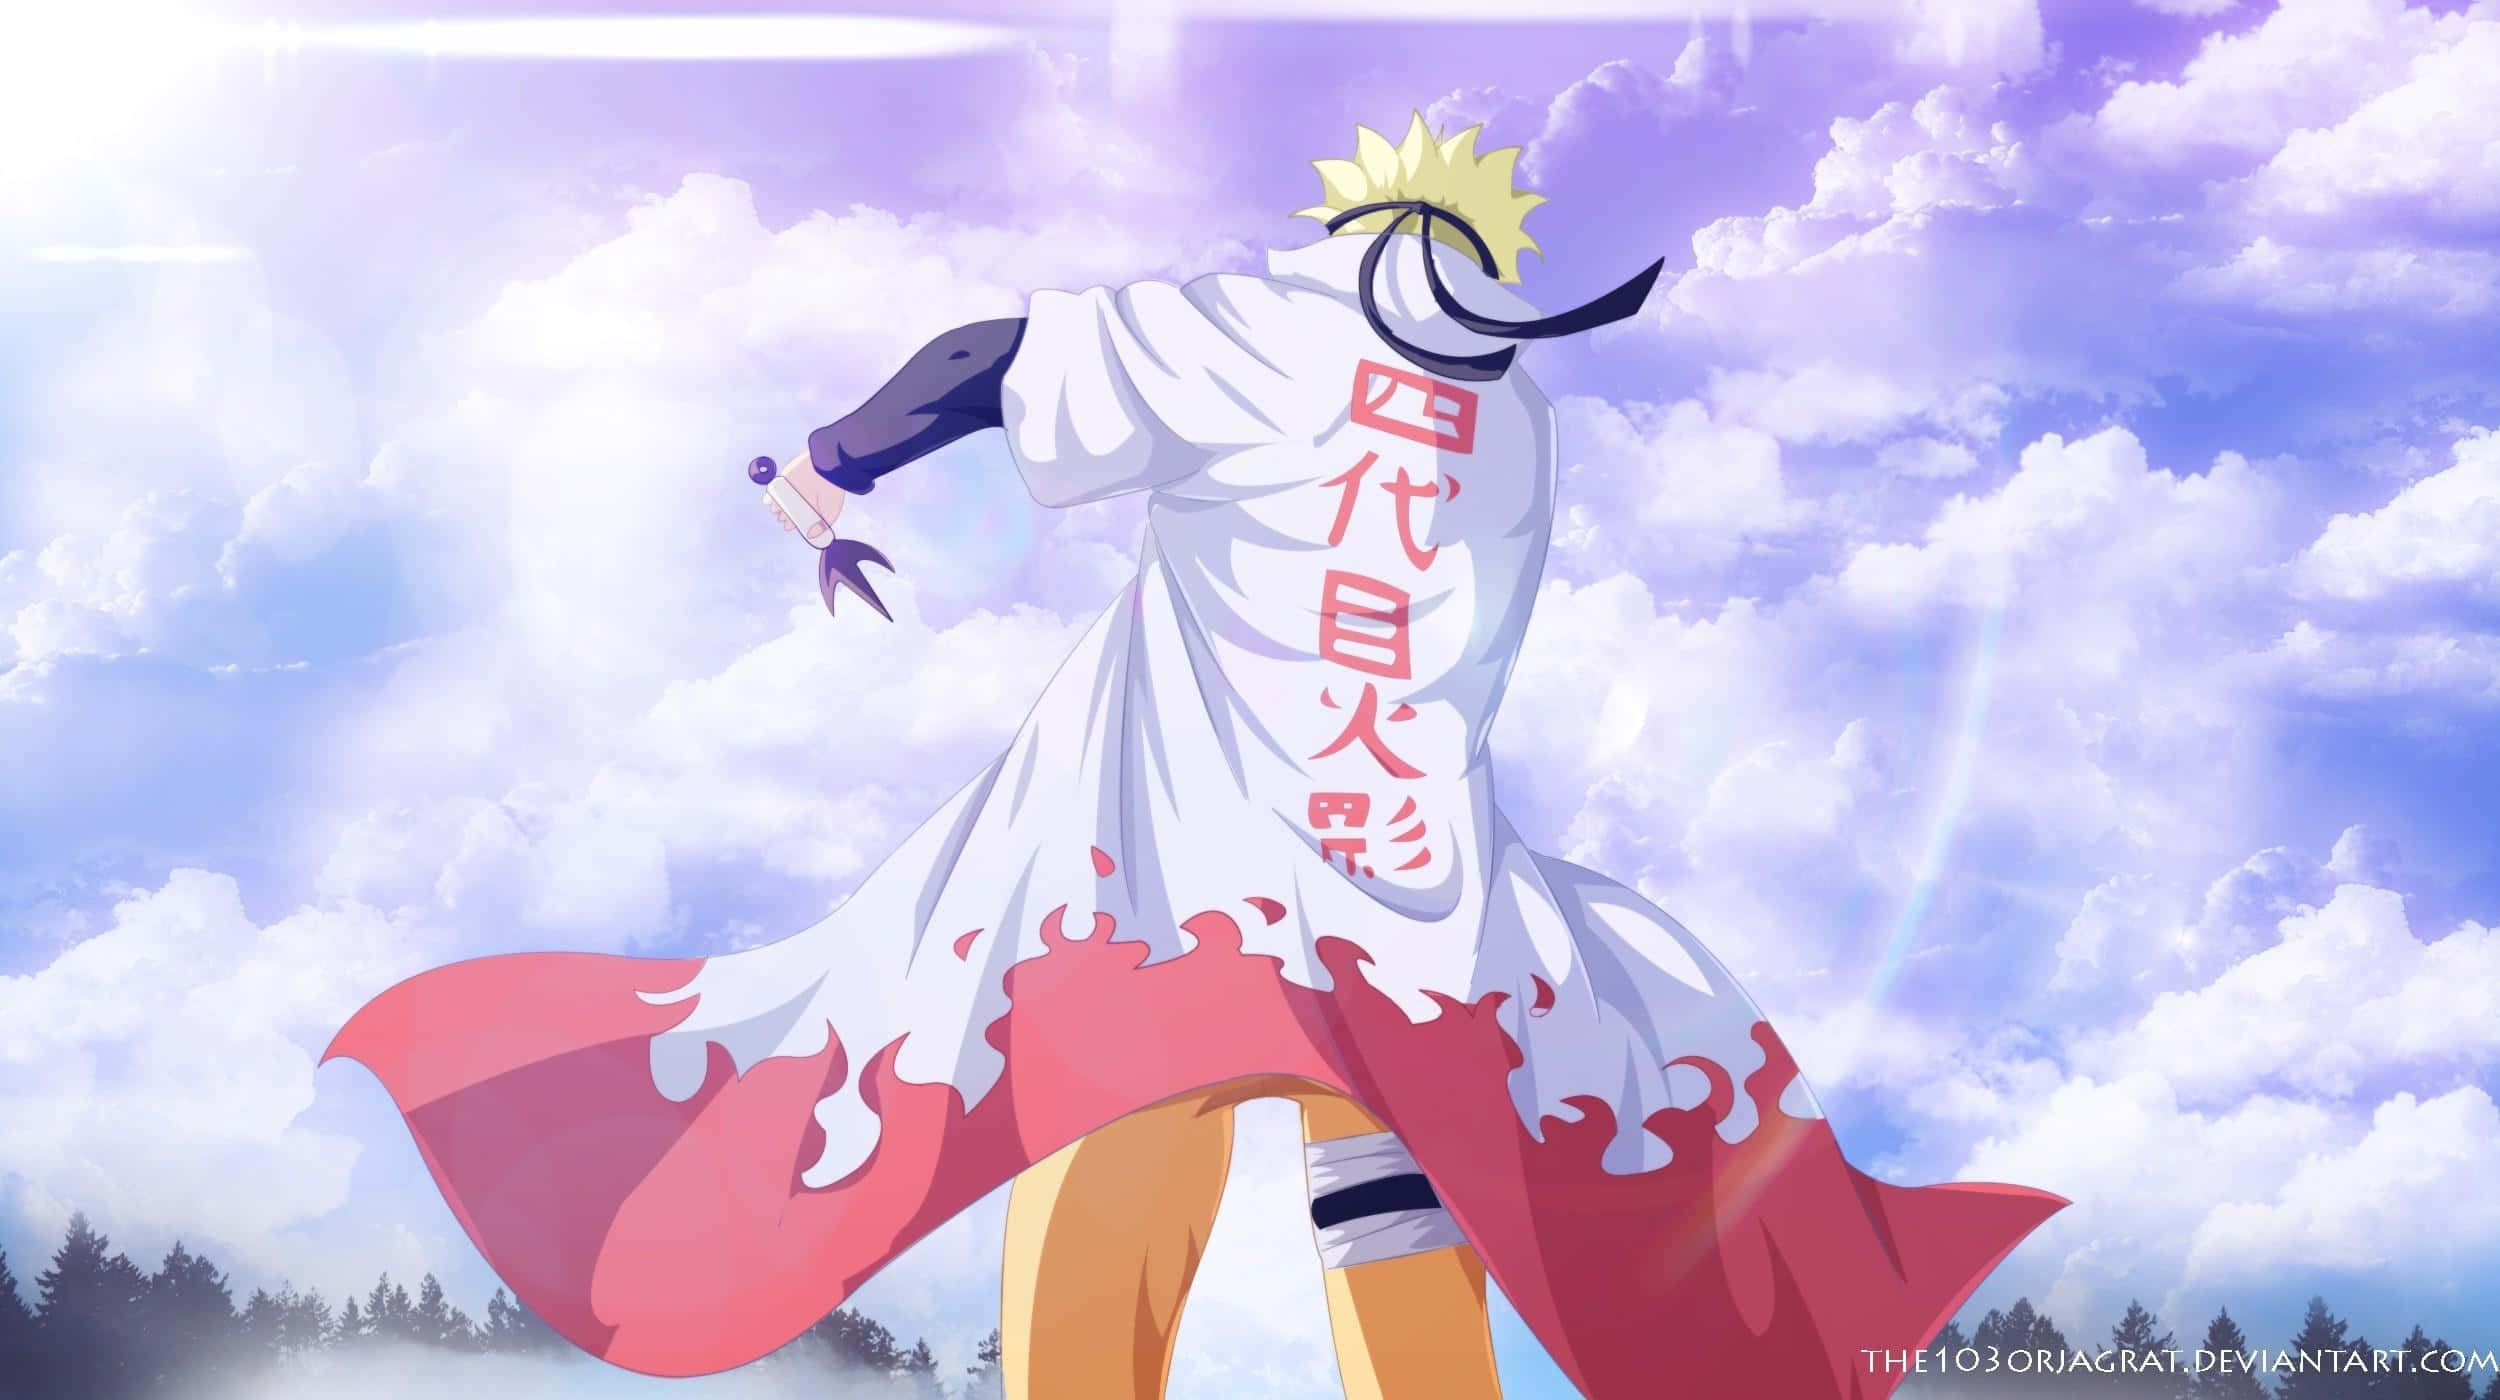 A Moment Of Courage And Determination As Naruto Uzumaki Stands Atop A Mountain In The Land Of Fire. Wallpaper